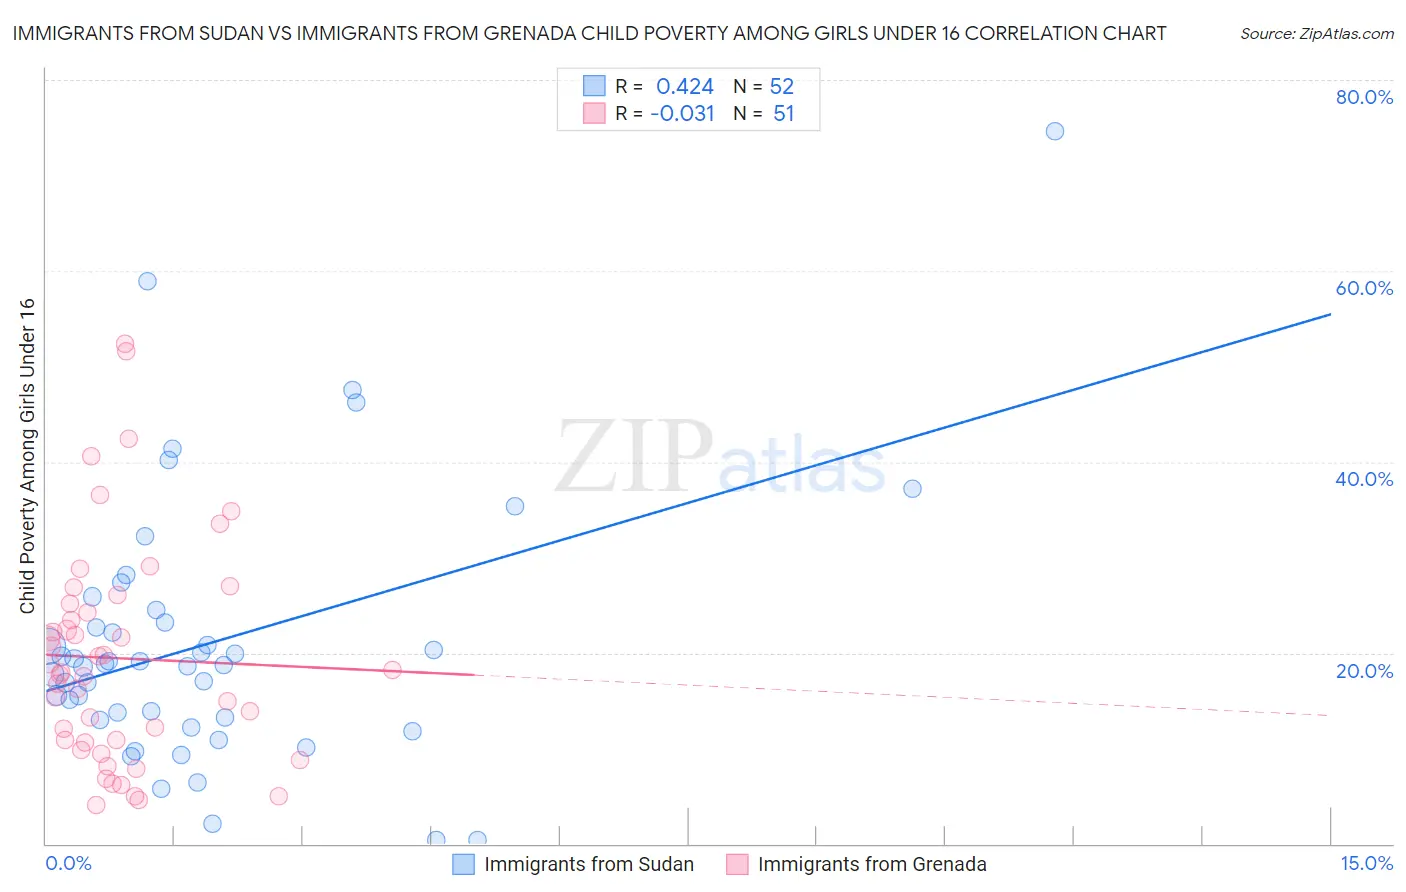 Immigrants from Sudan vs Immigrants from Grenada Child Poverty Among Girls Under 16